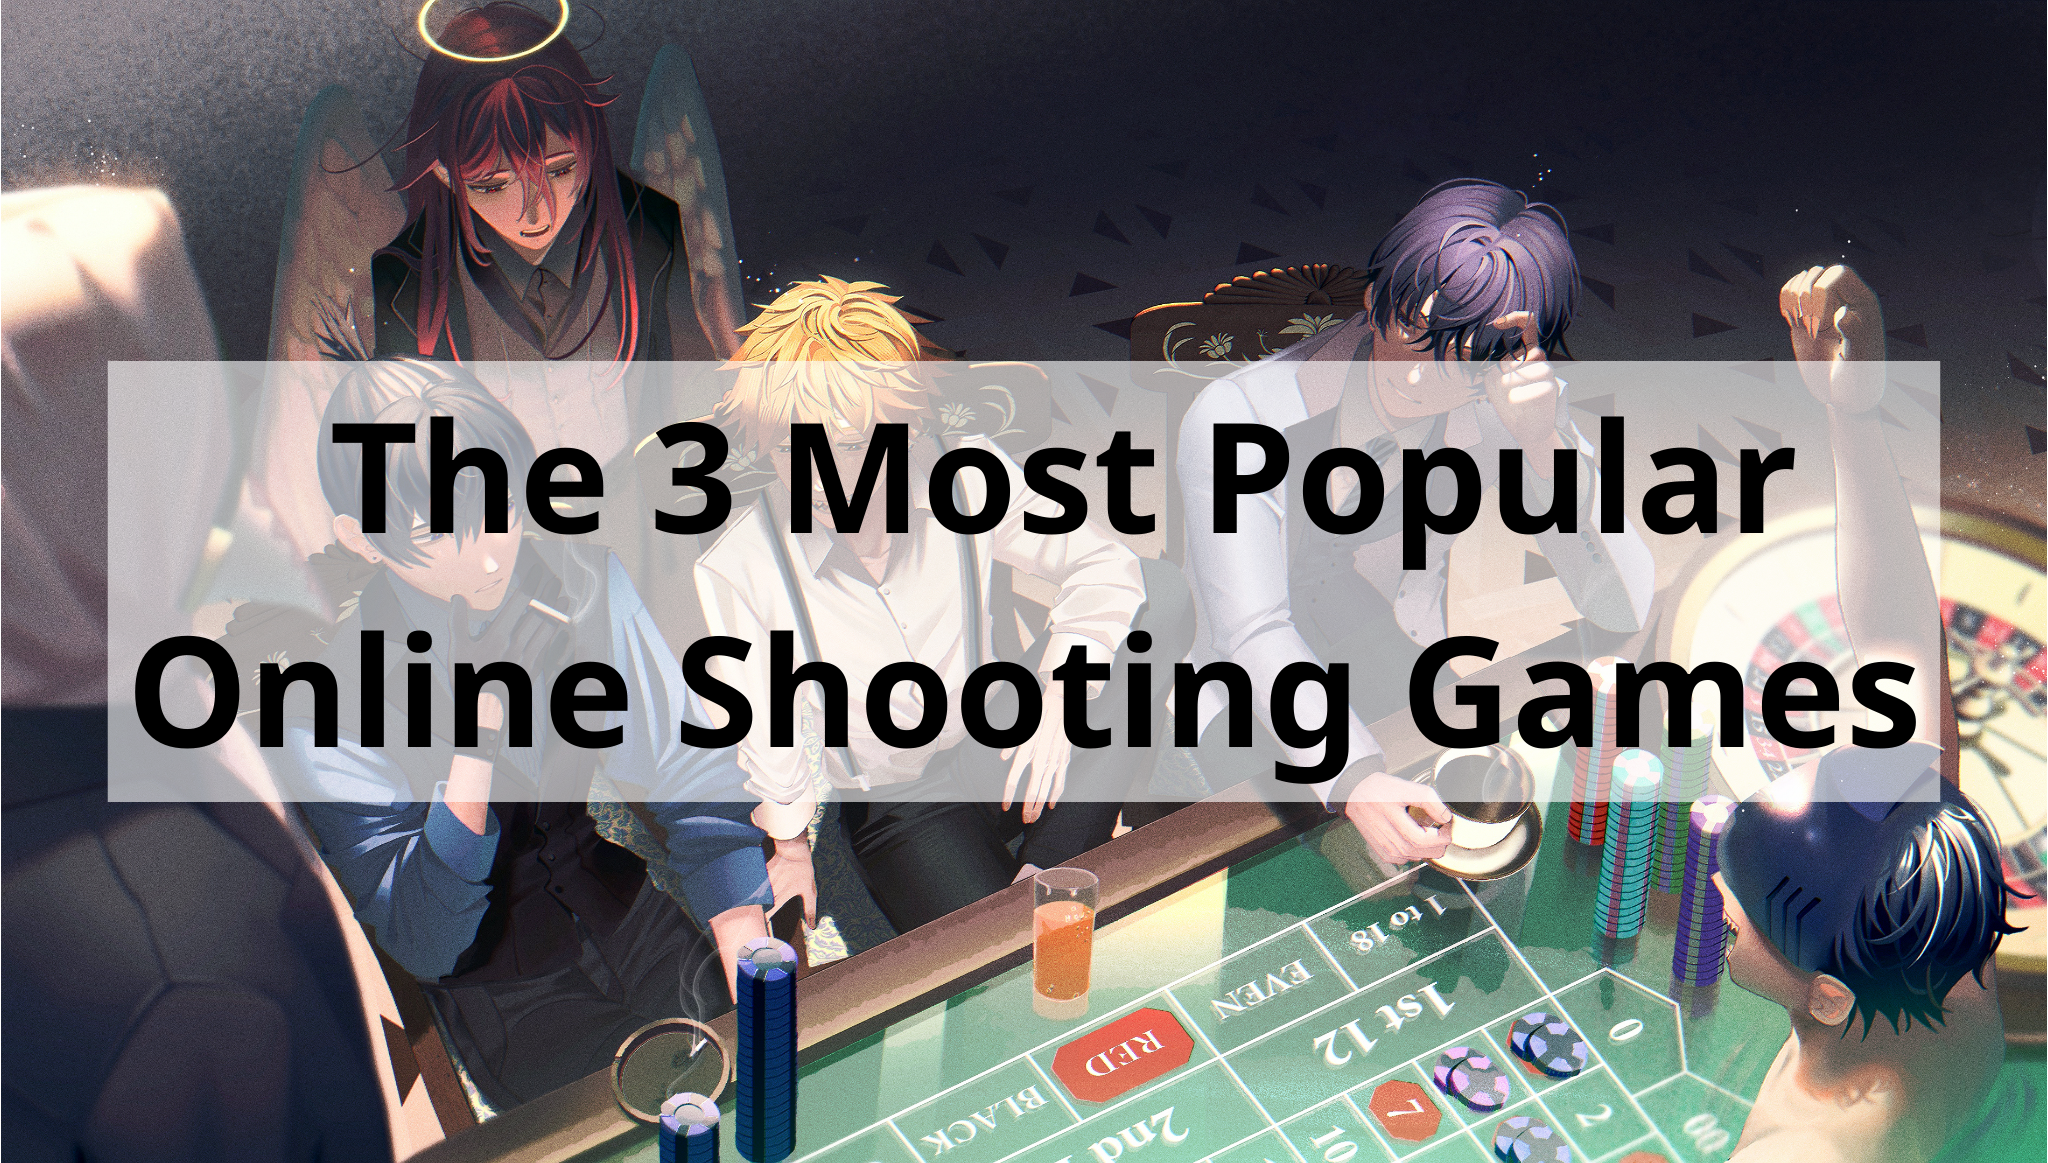 The 3 Most Popular Online Shooting Games